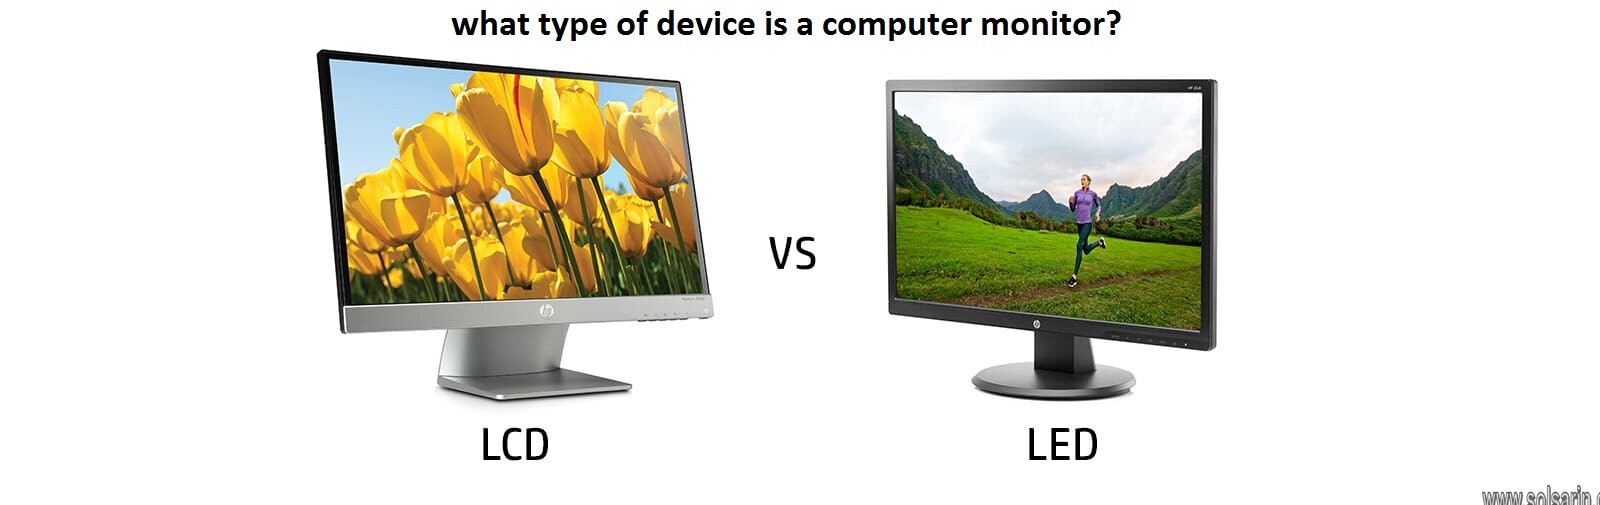 what type of device is a computer monitor?